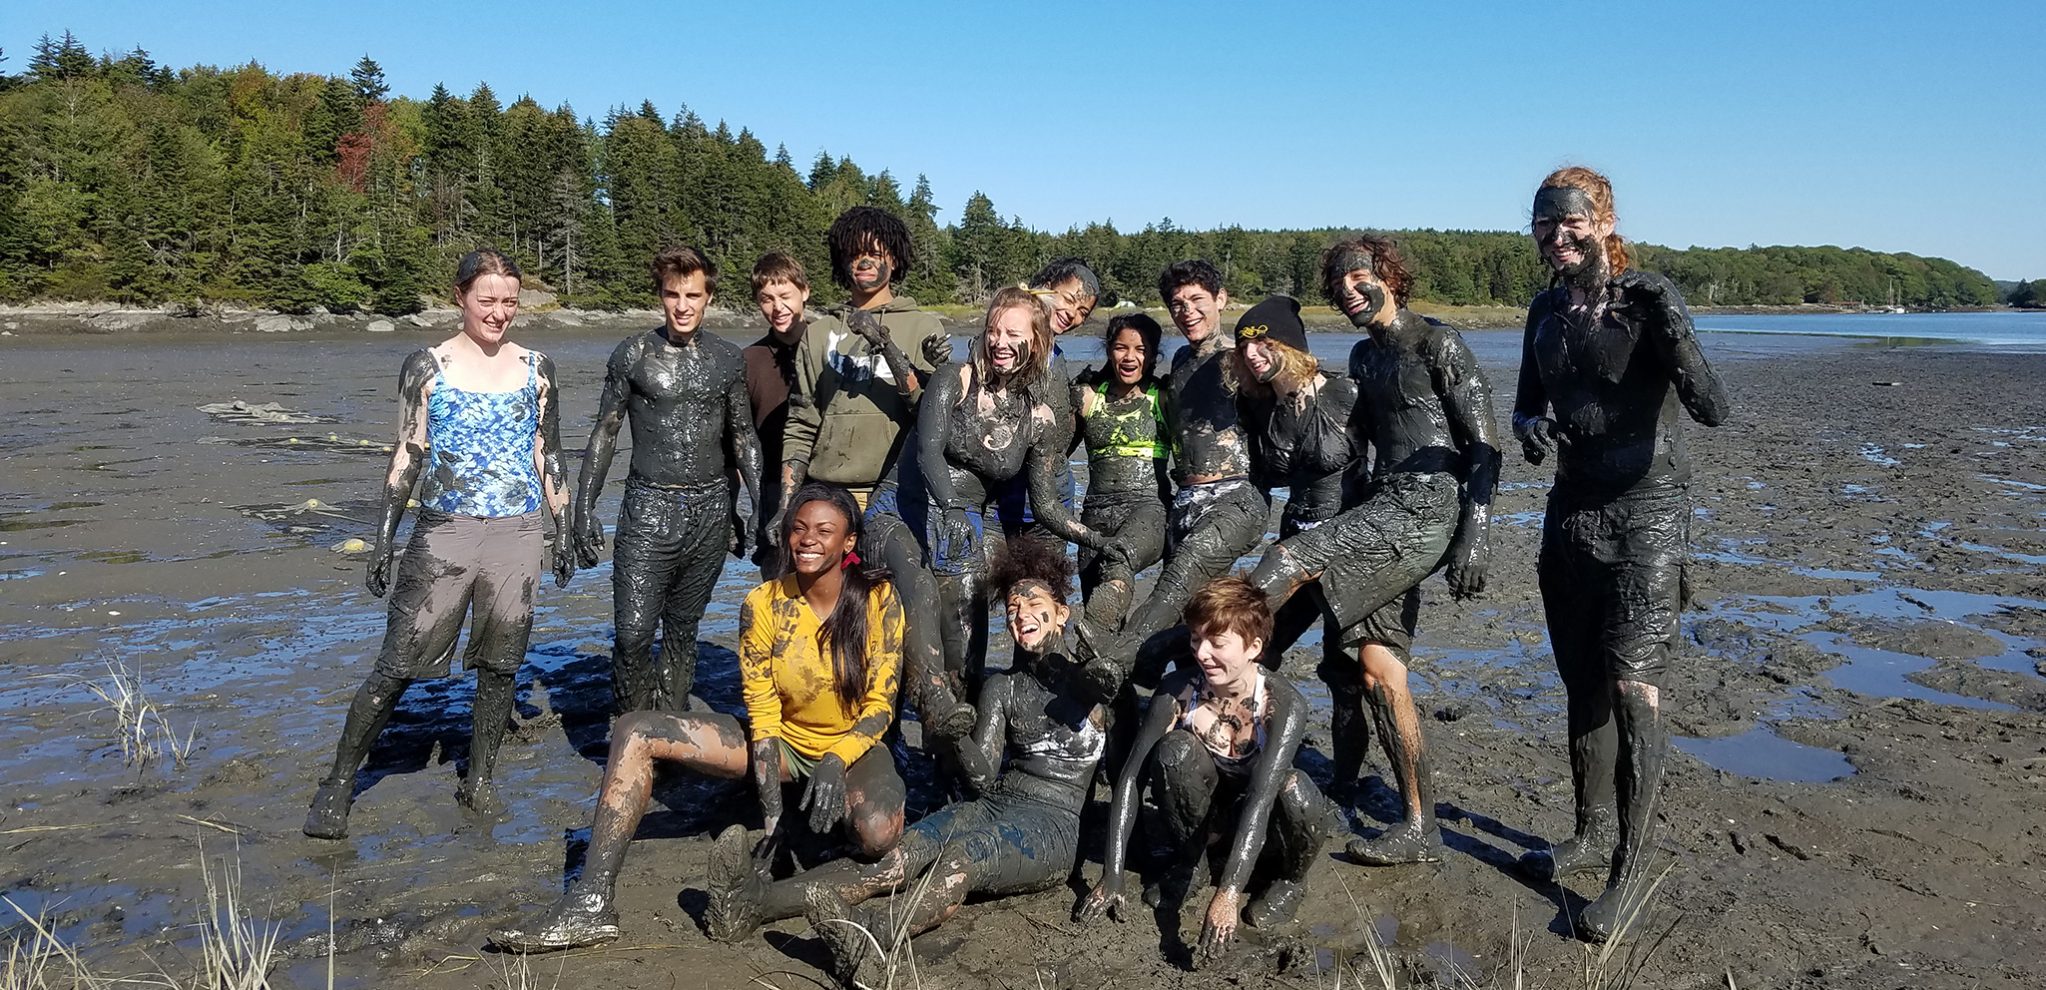 Senior class on Hermit Island trip poses while covered in mud at the beach